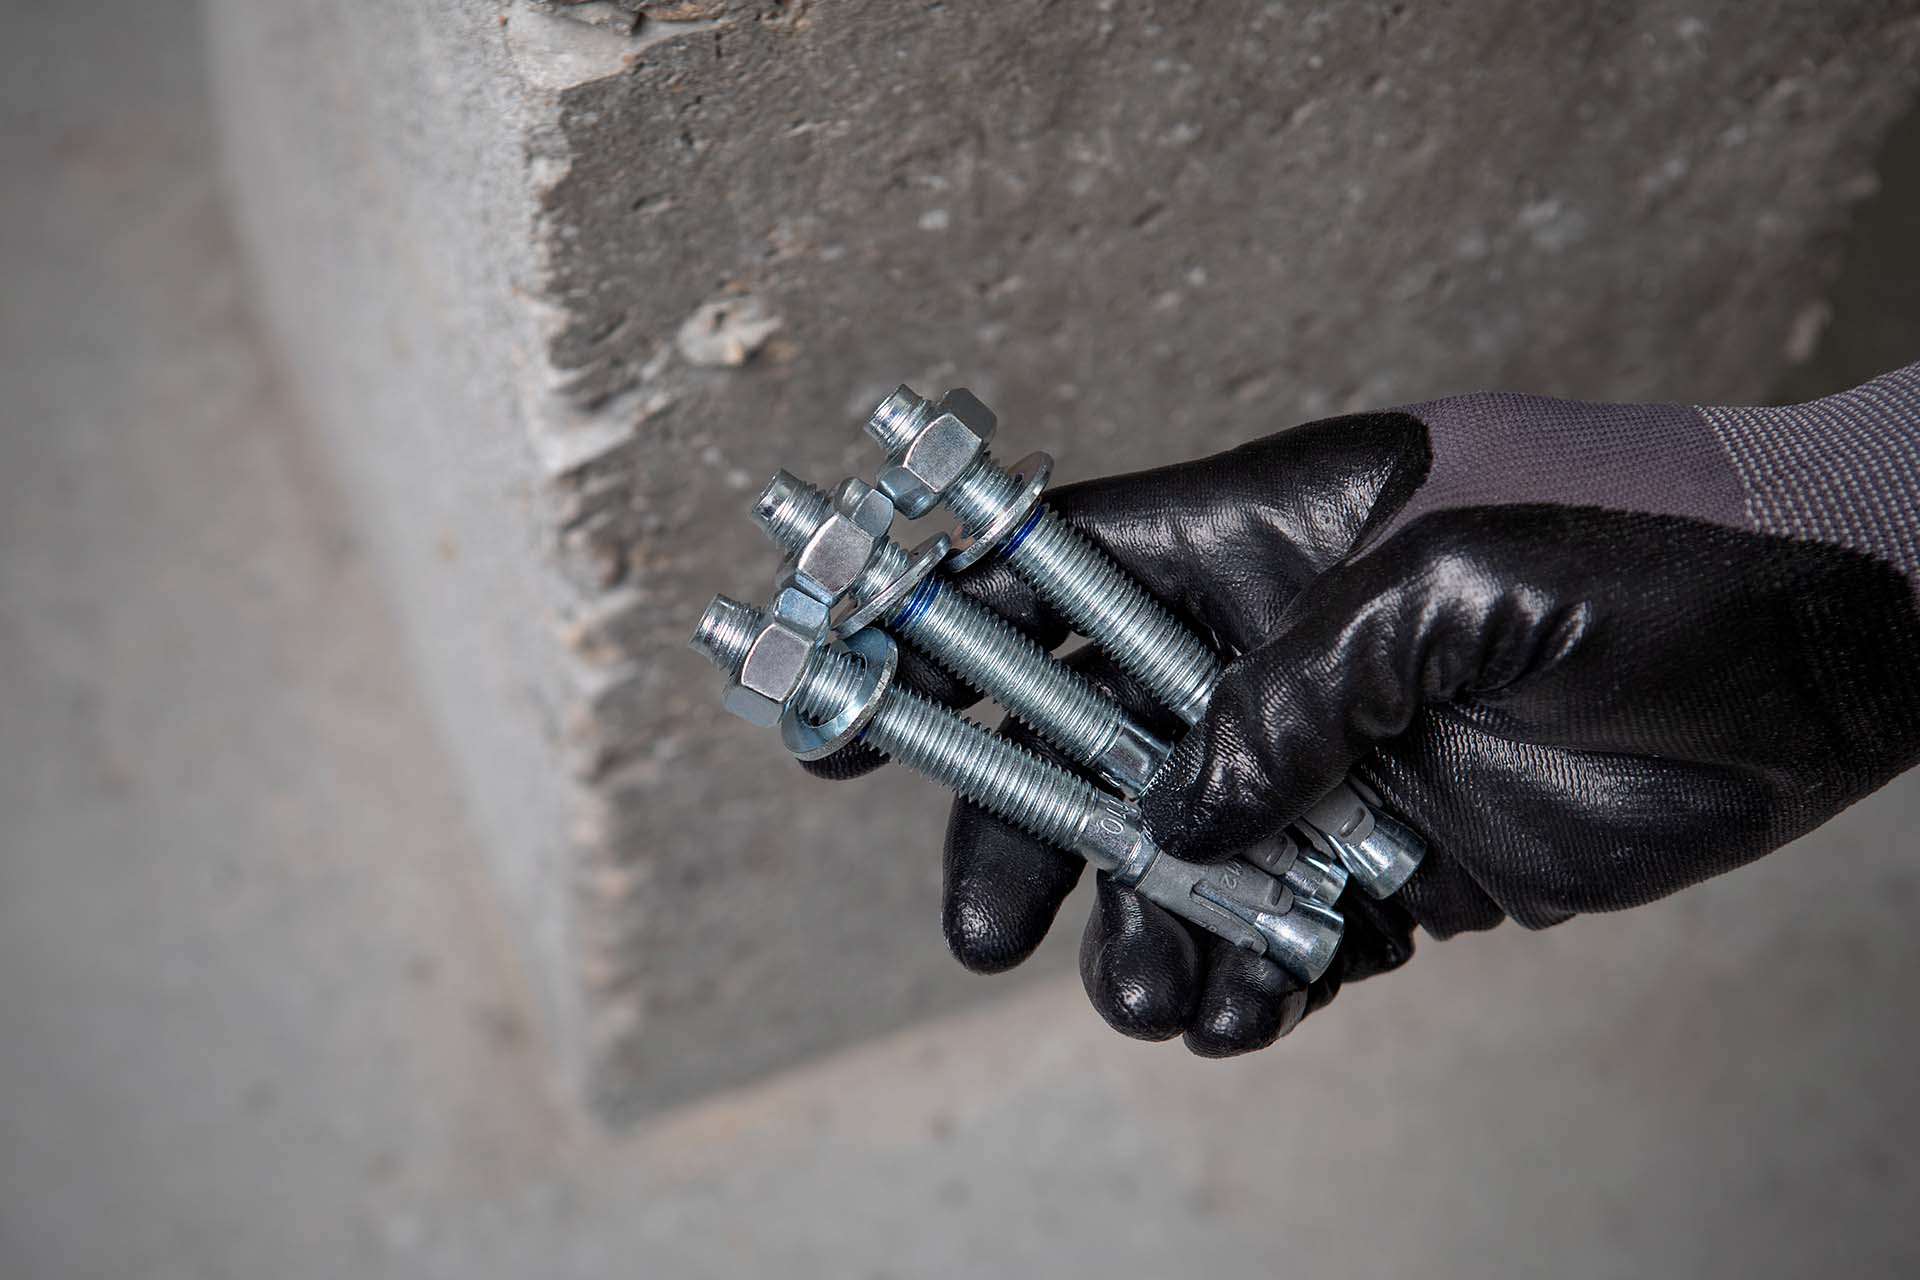 Operator hand with protective glove holding Index® MT male anchors